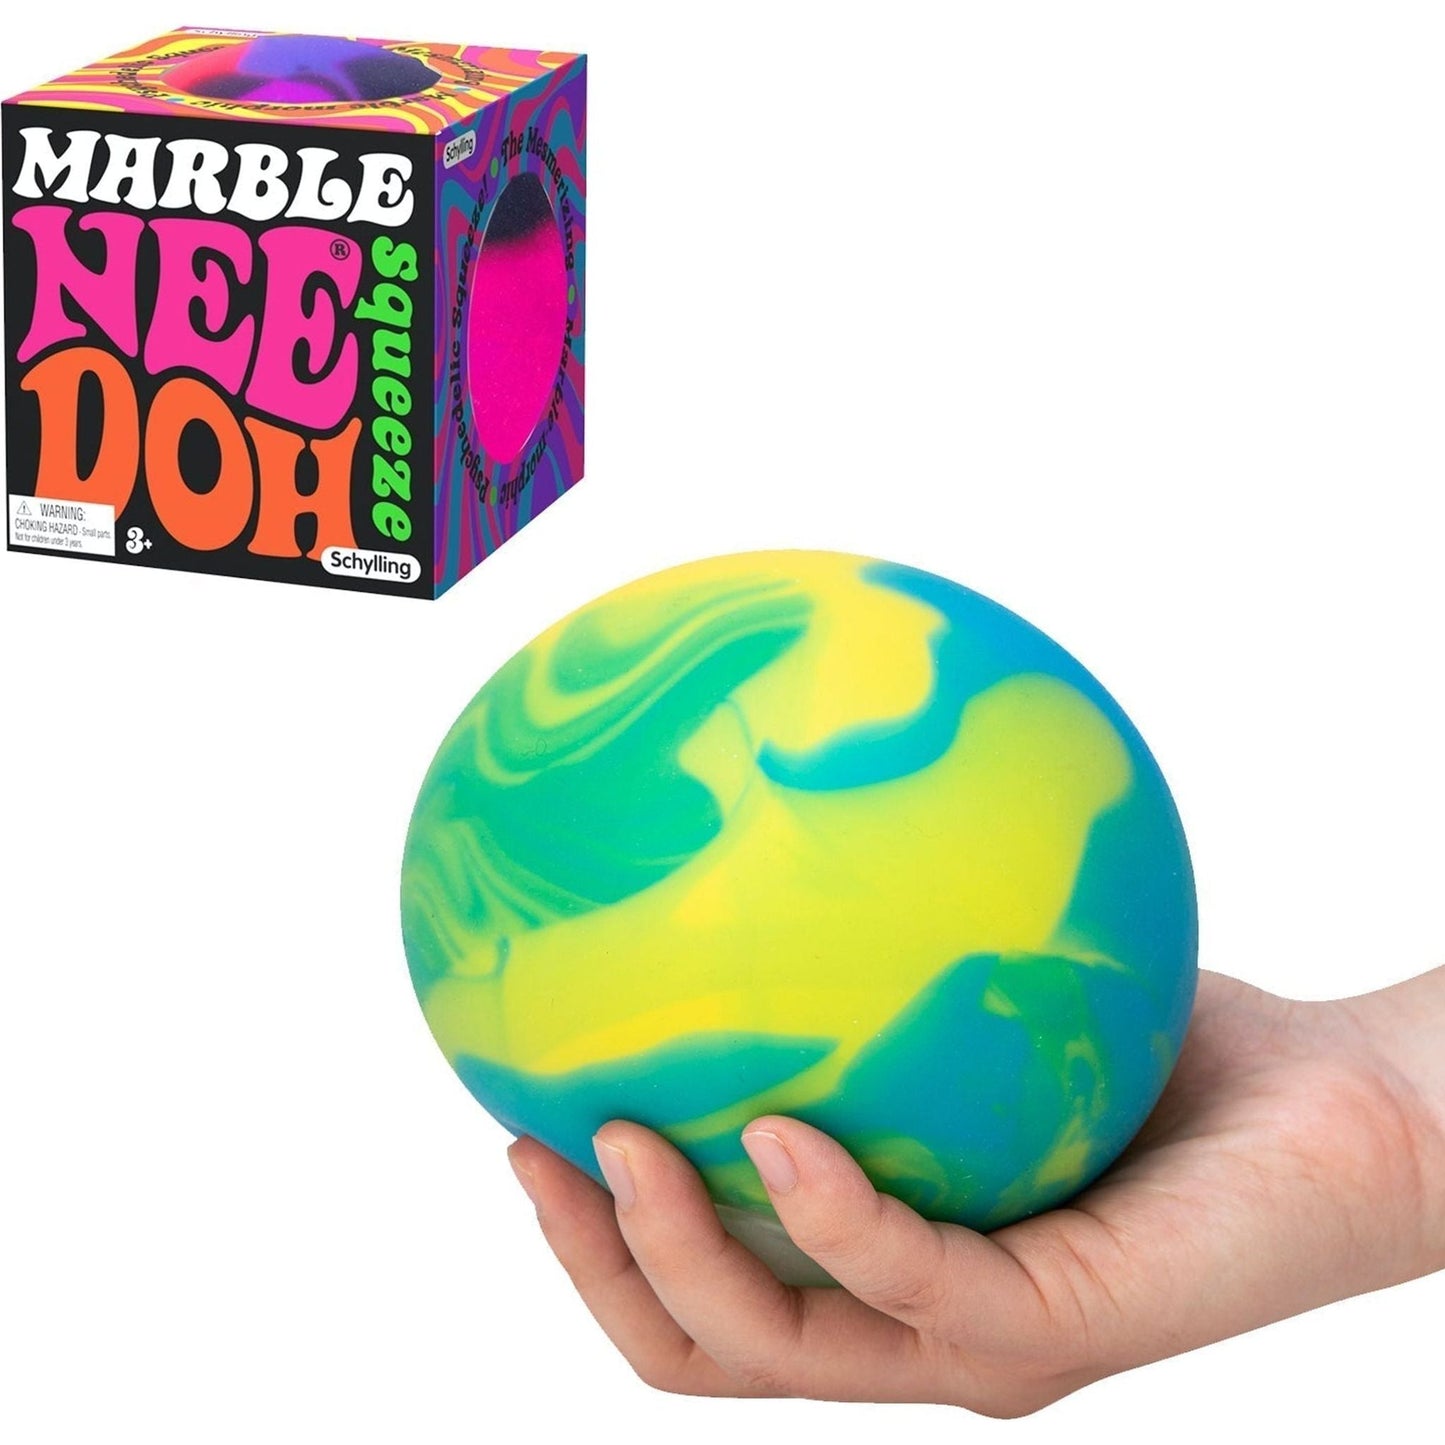 Marble Super Nee-Doh - Toybox Tales